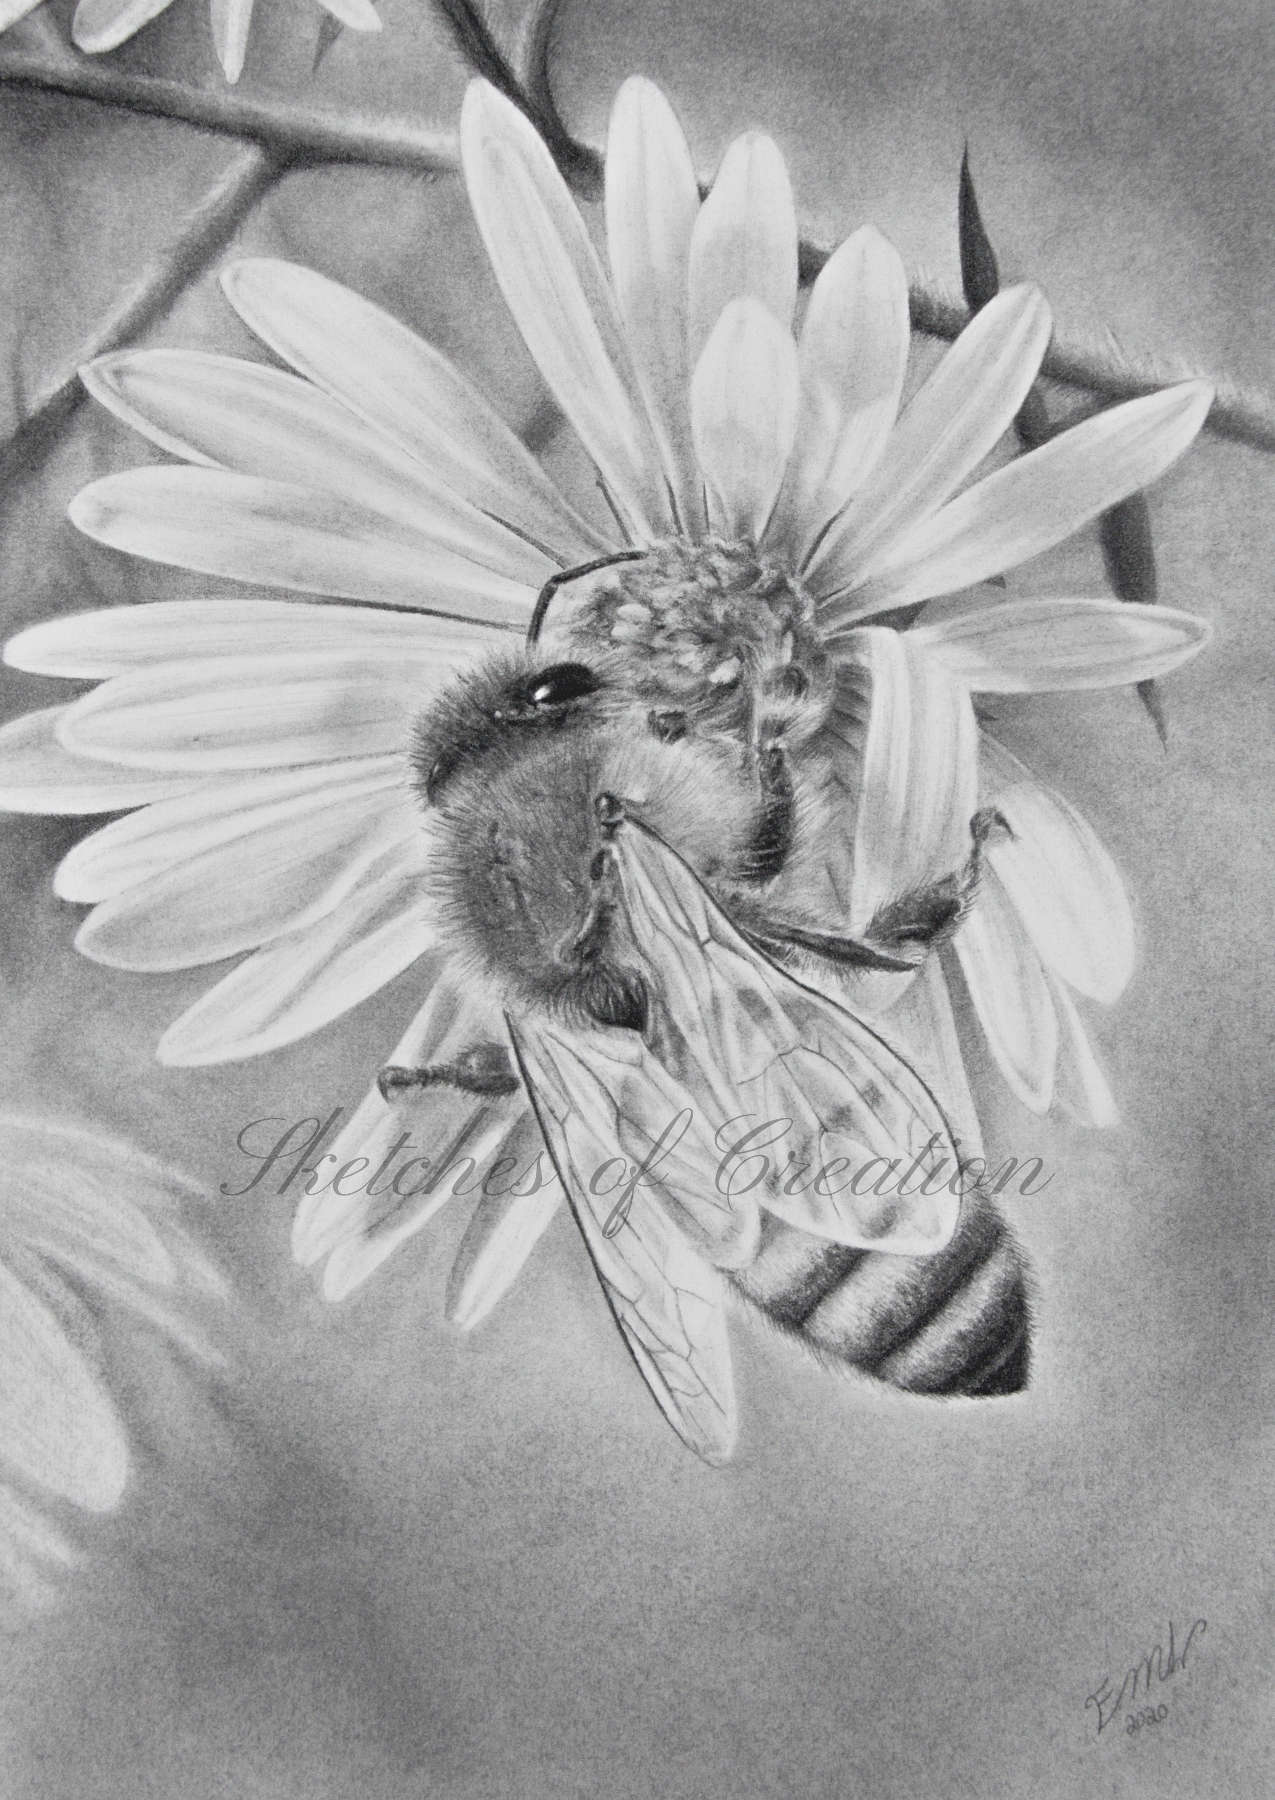 'Honeybee' a drawing of a honey bee on a flower. 5x7 inches. Completed October 2020